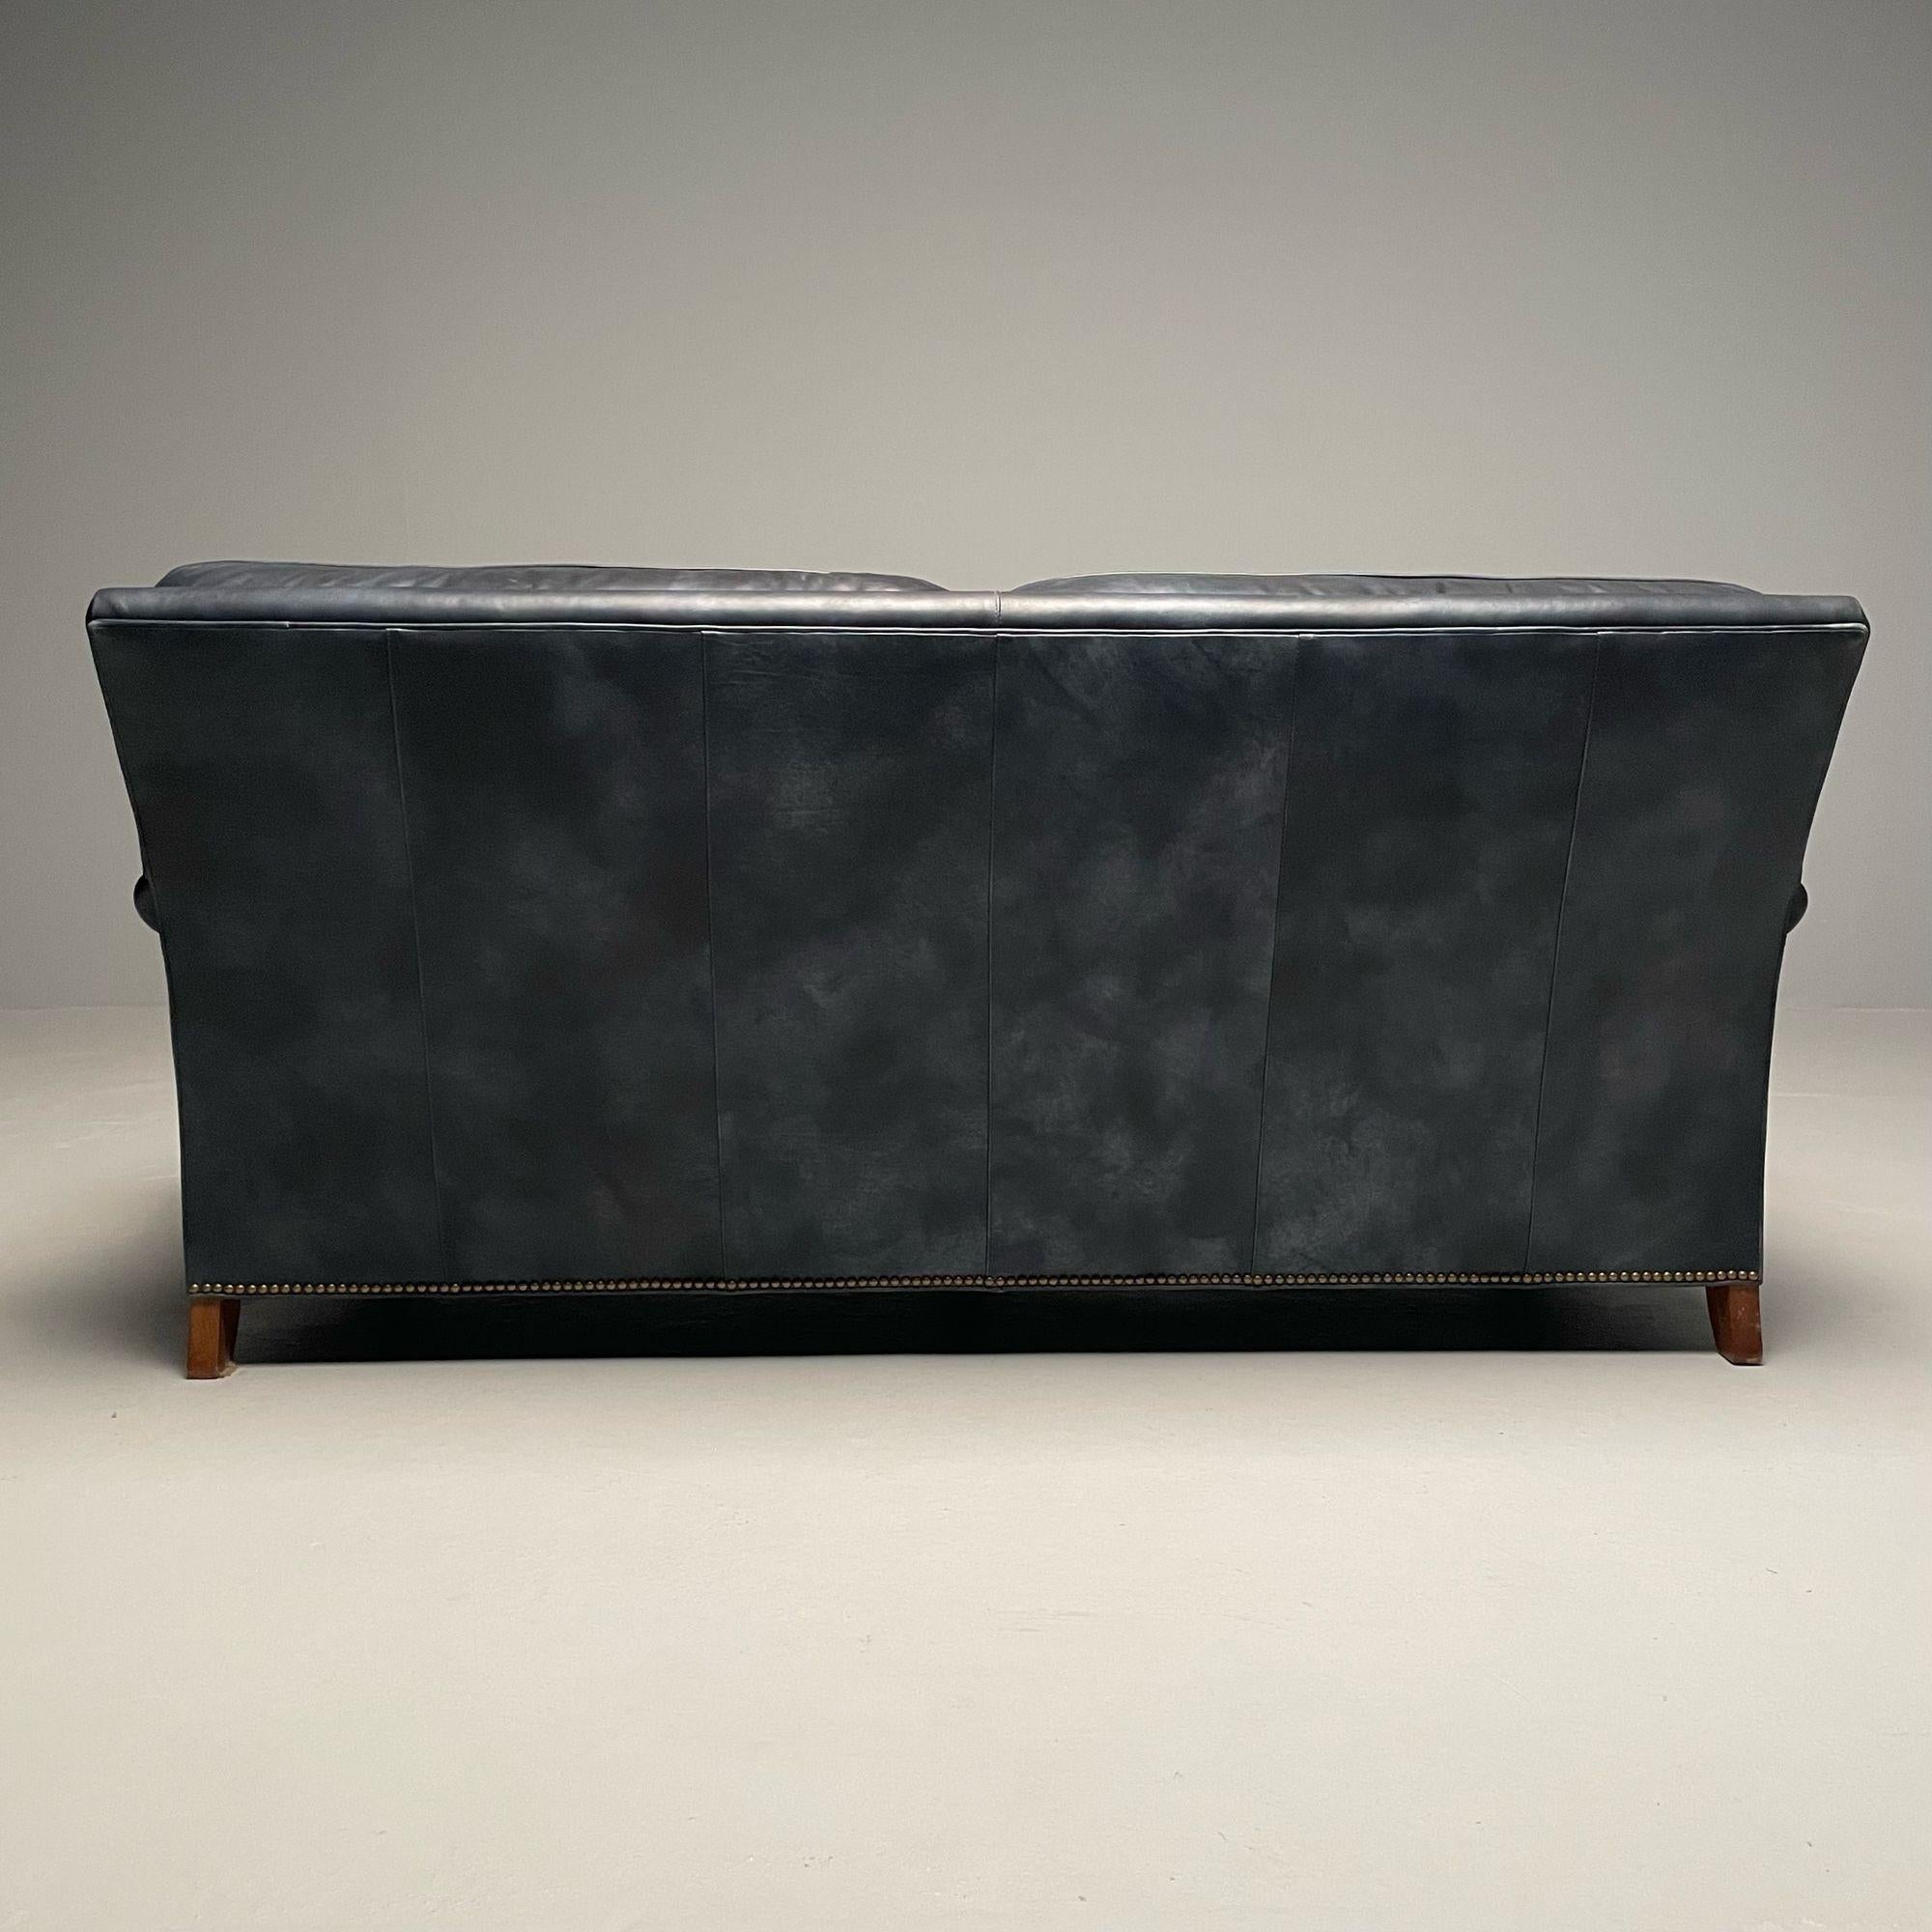 Hancock and Moore, Georgian Scroll Arm Sofa, Dark Blue Distressed Leather, 2000s For Sale 7